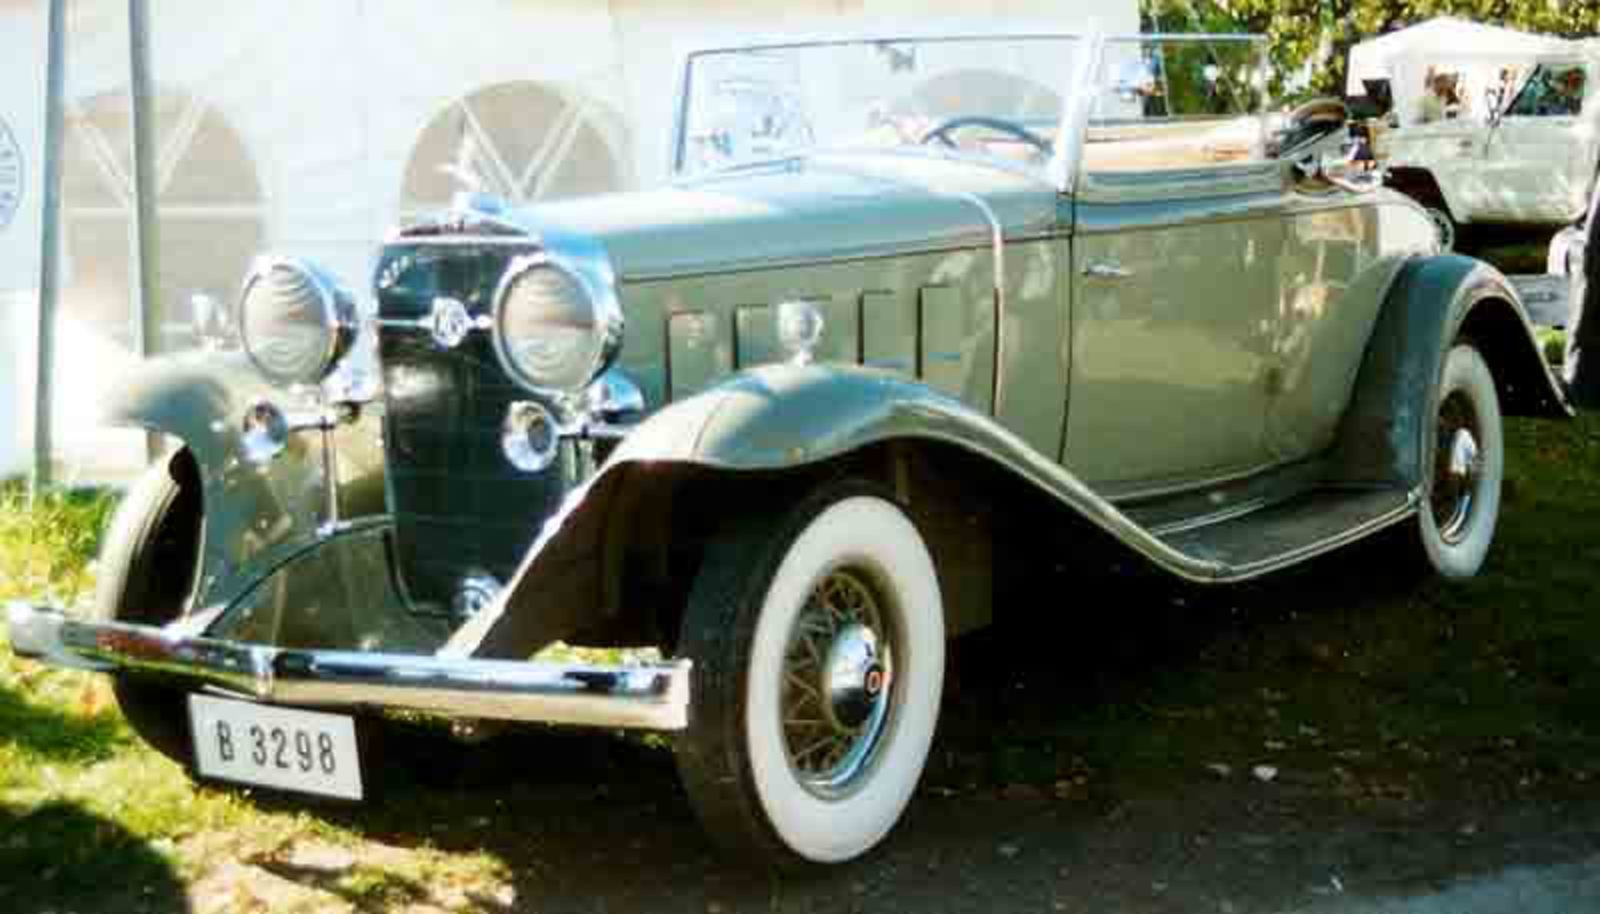 LaSalle Ser 340 Fleetwood roadster Photo Gallery: Photo #02 out of ...